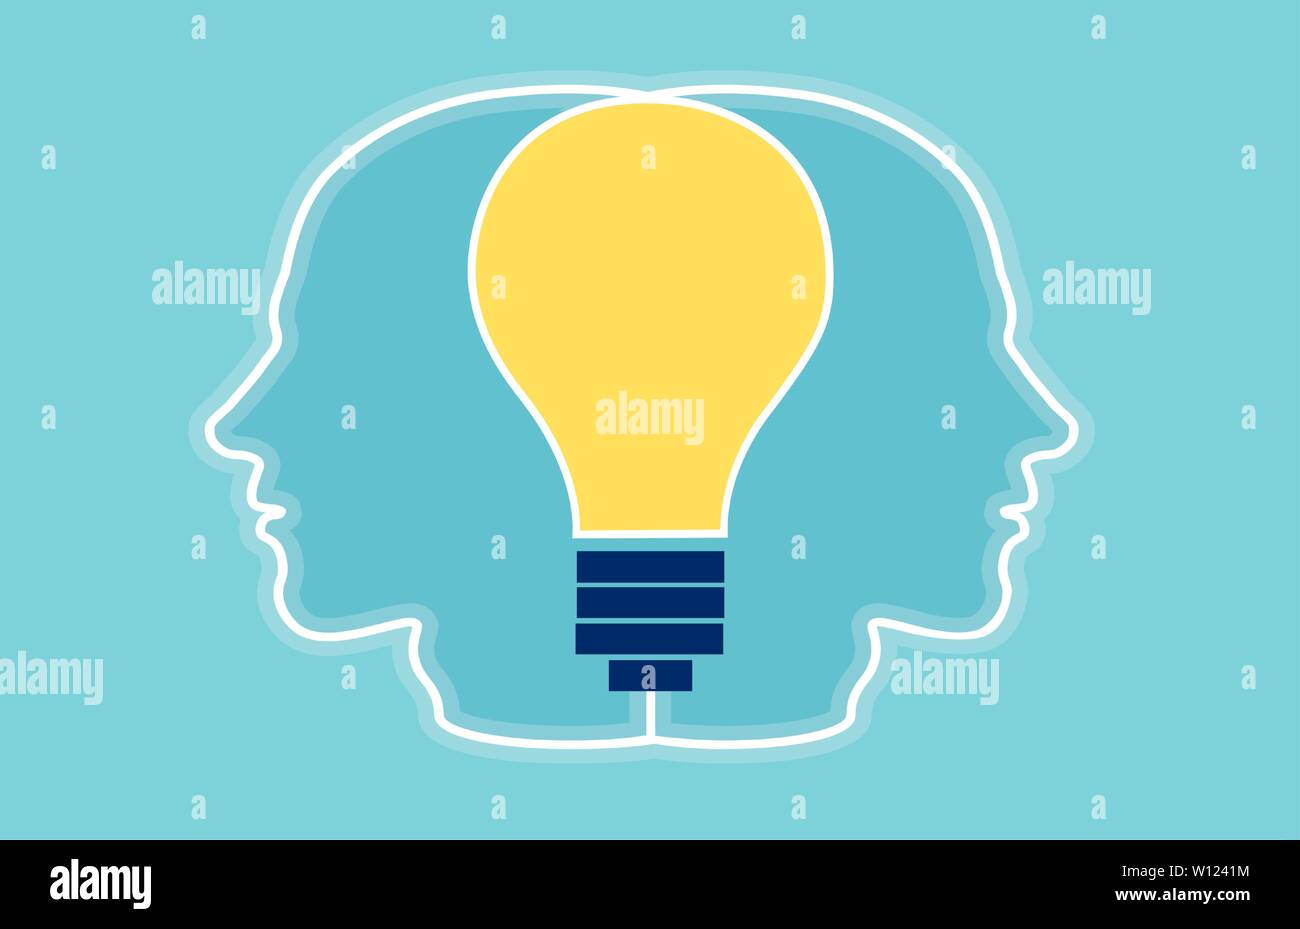 Vector of two heads silhouette with bright light bulb inside connecting them. Creative teamwork concept Stock Vector